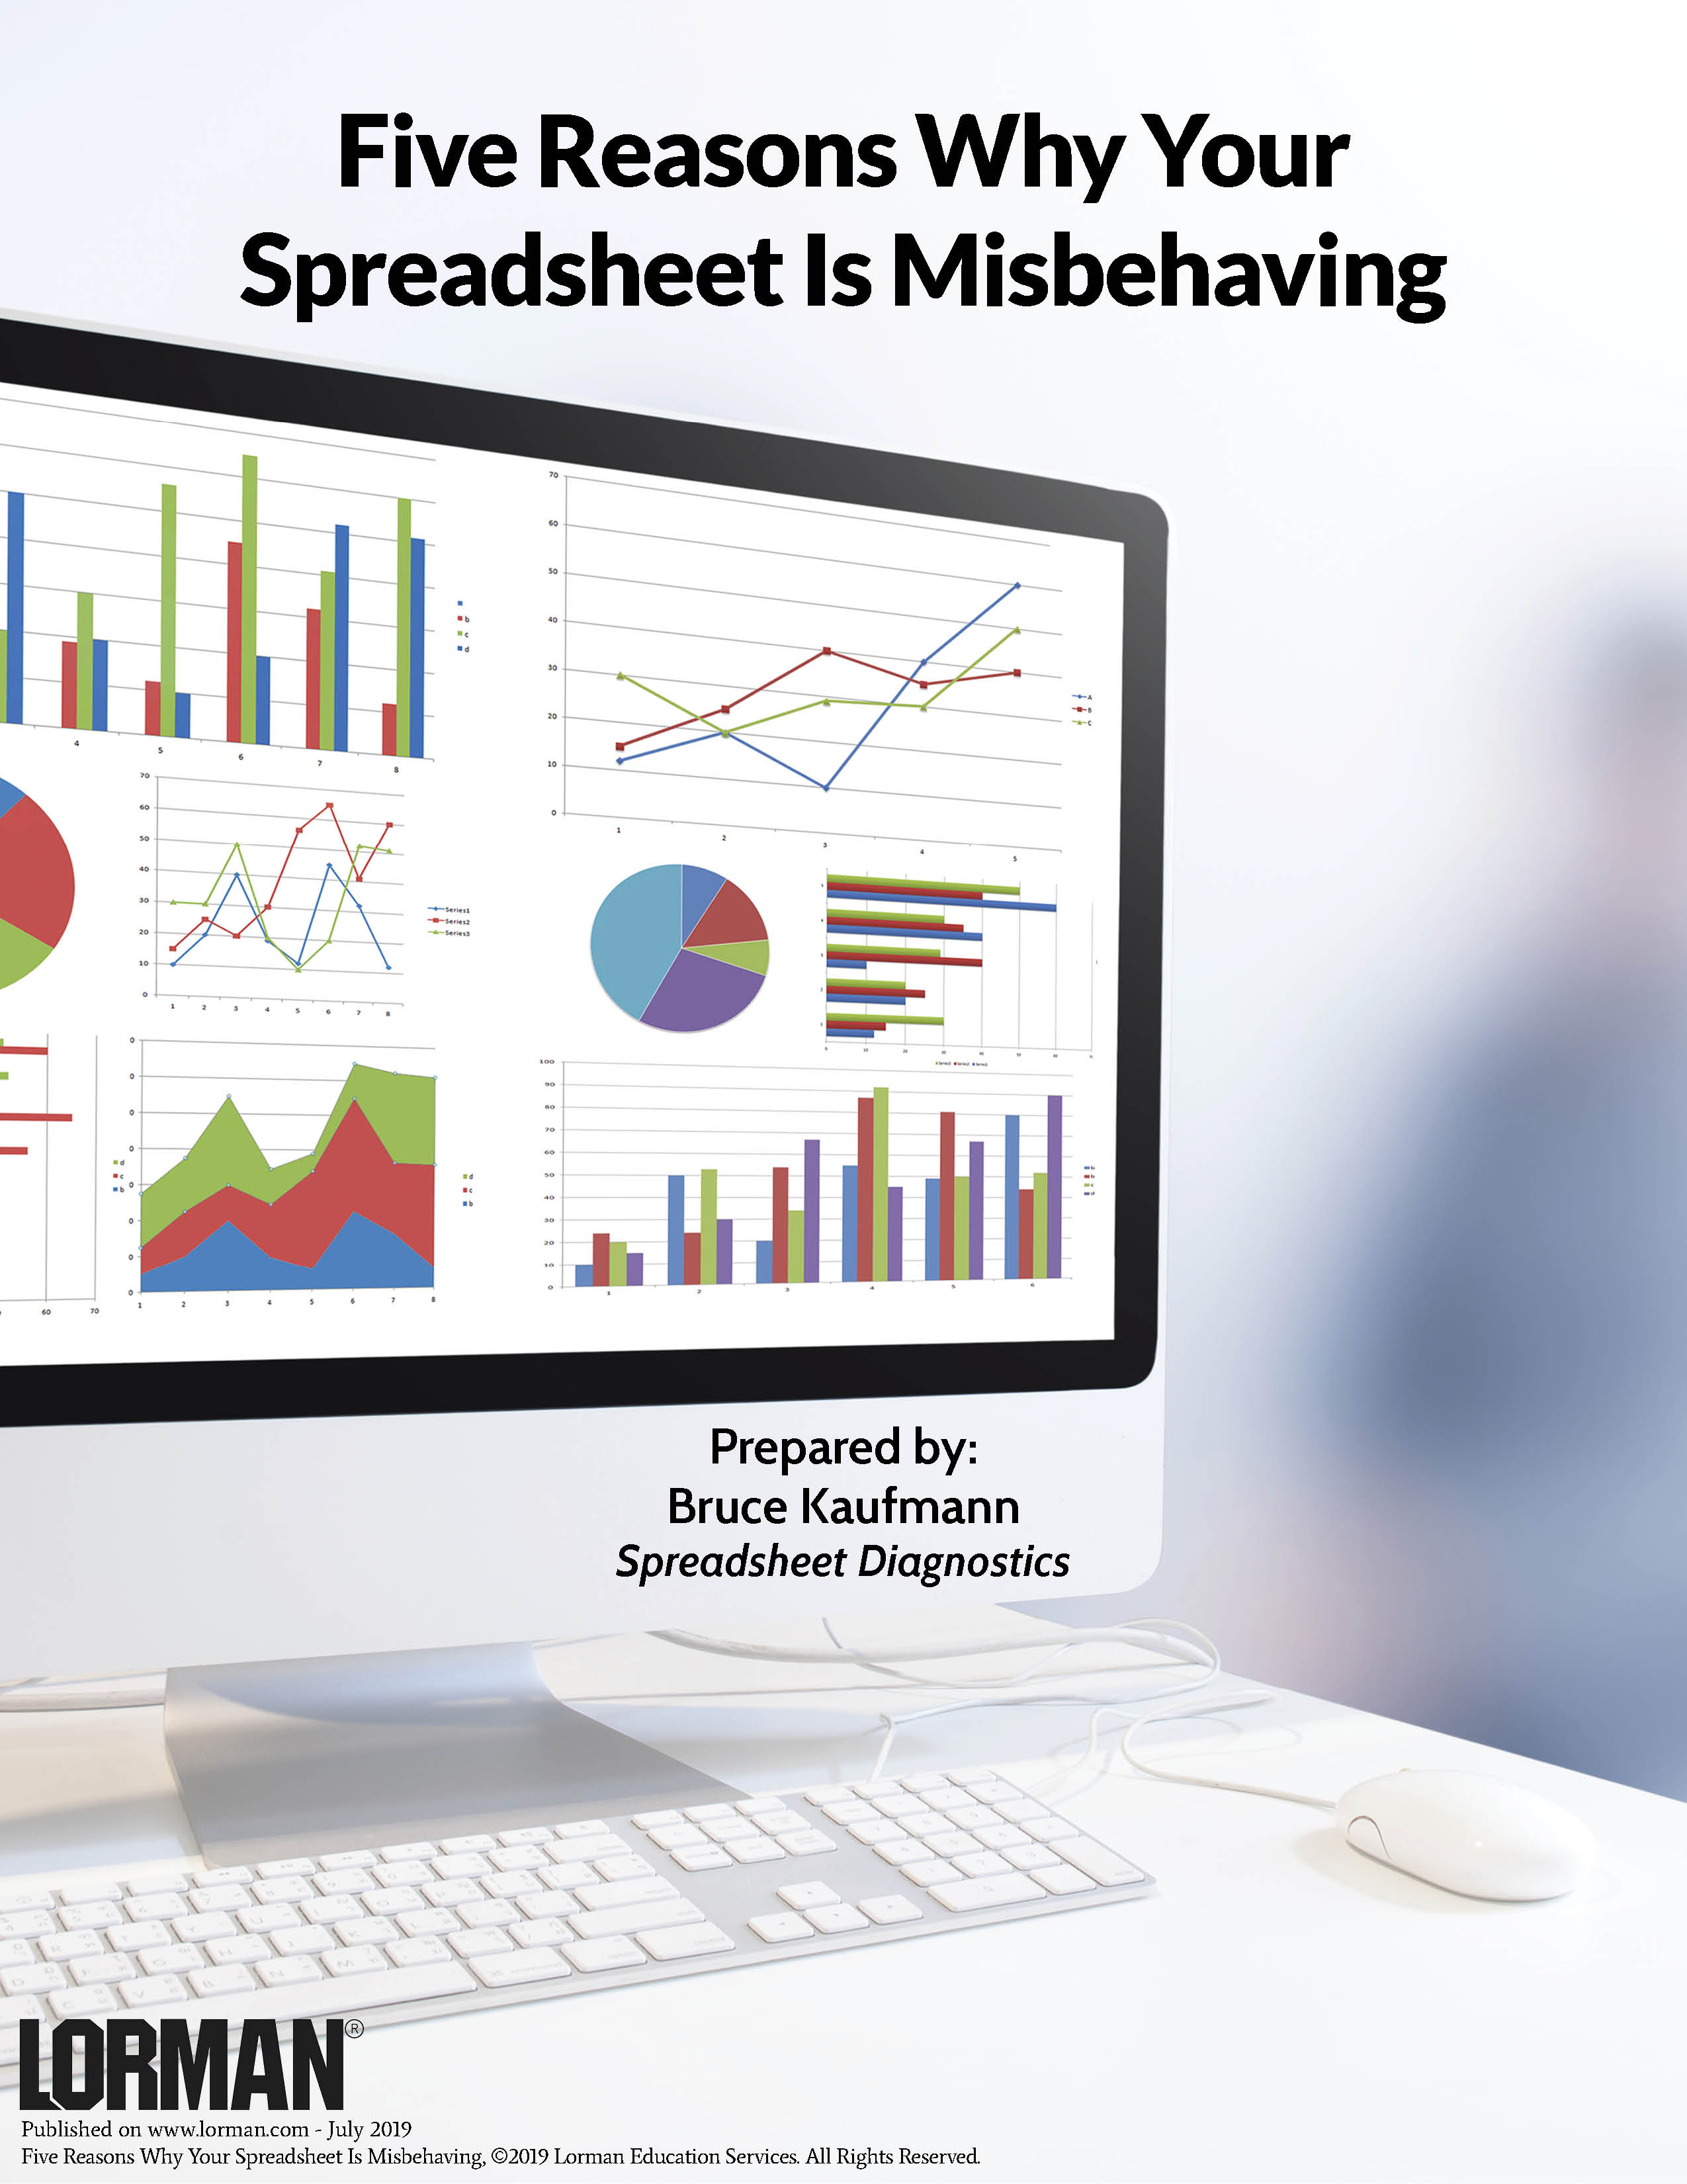 Five Reasons Why Your Spreadsheet Is Misbehaving